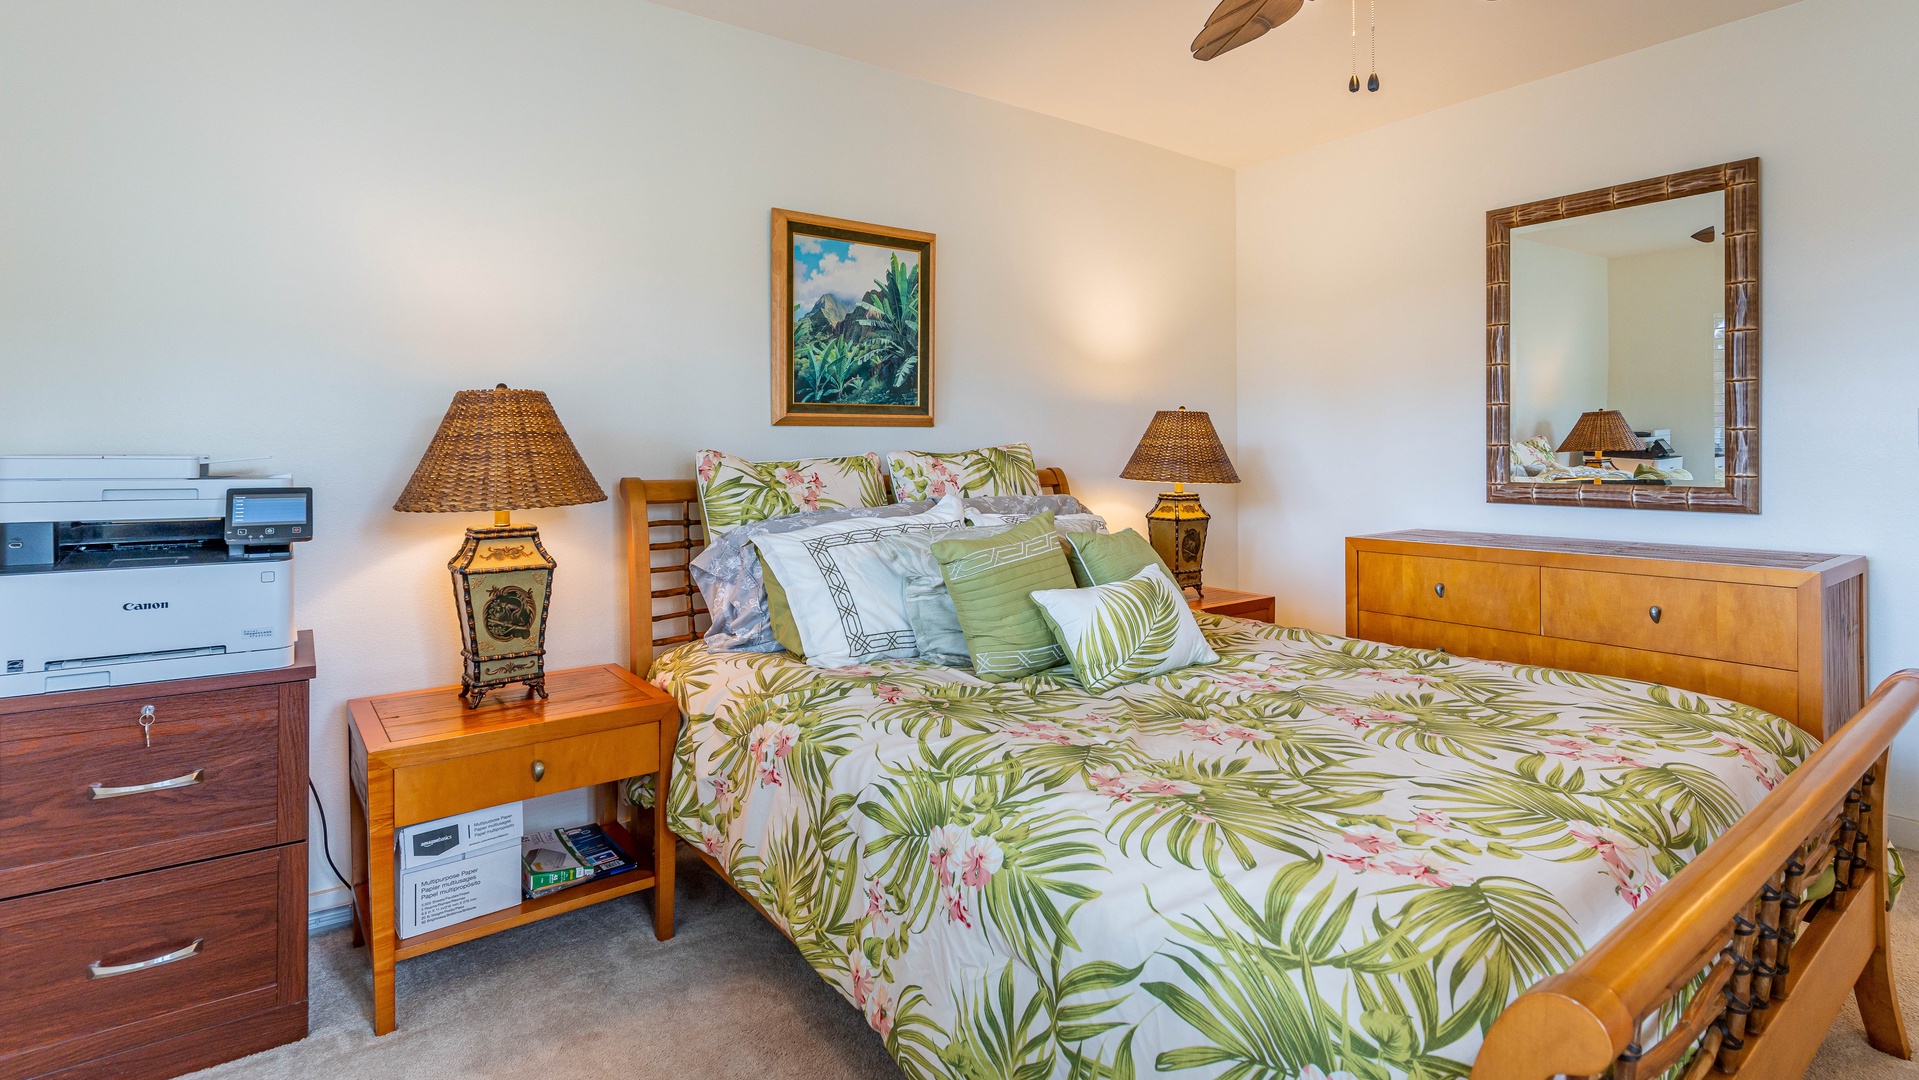 Kapolei Vacation Rentals, Kai Lani 20C - The second guest bedroom is peaceful and spacious for restful slumber.